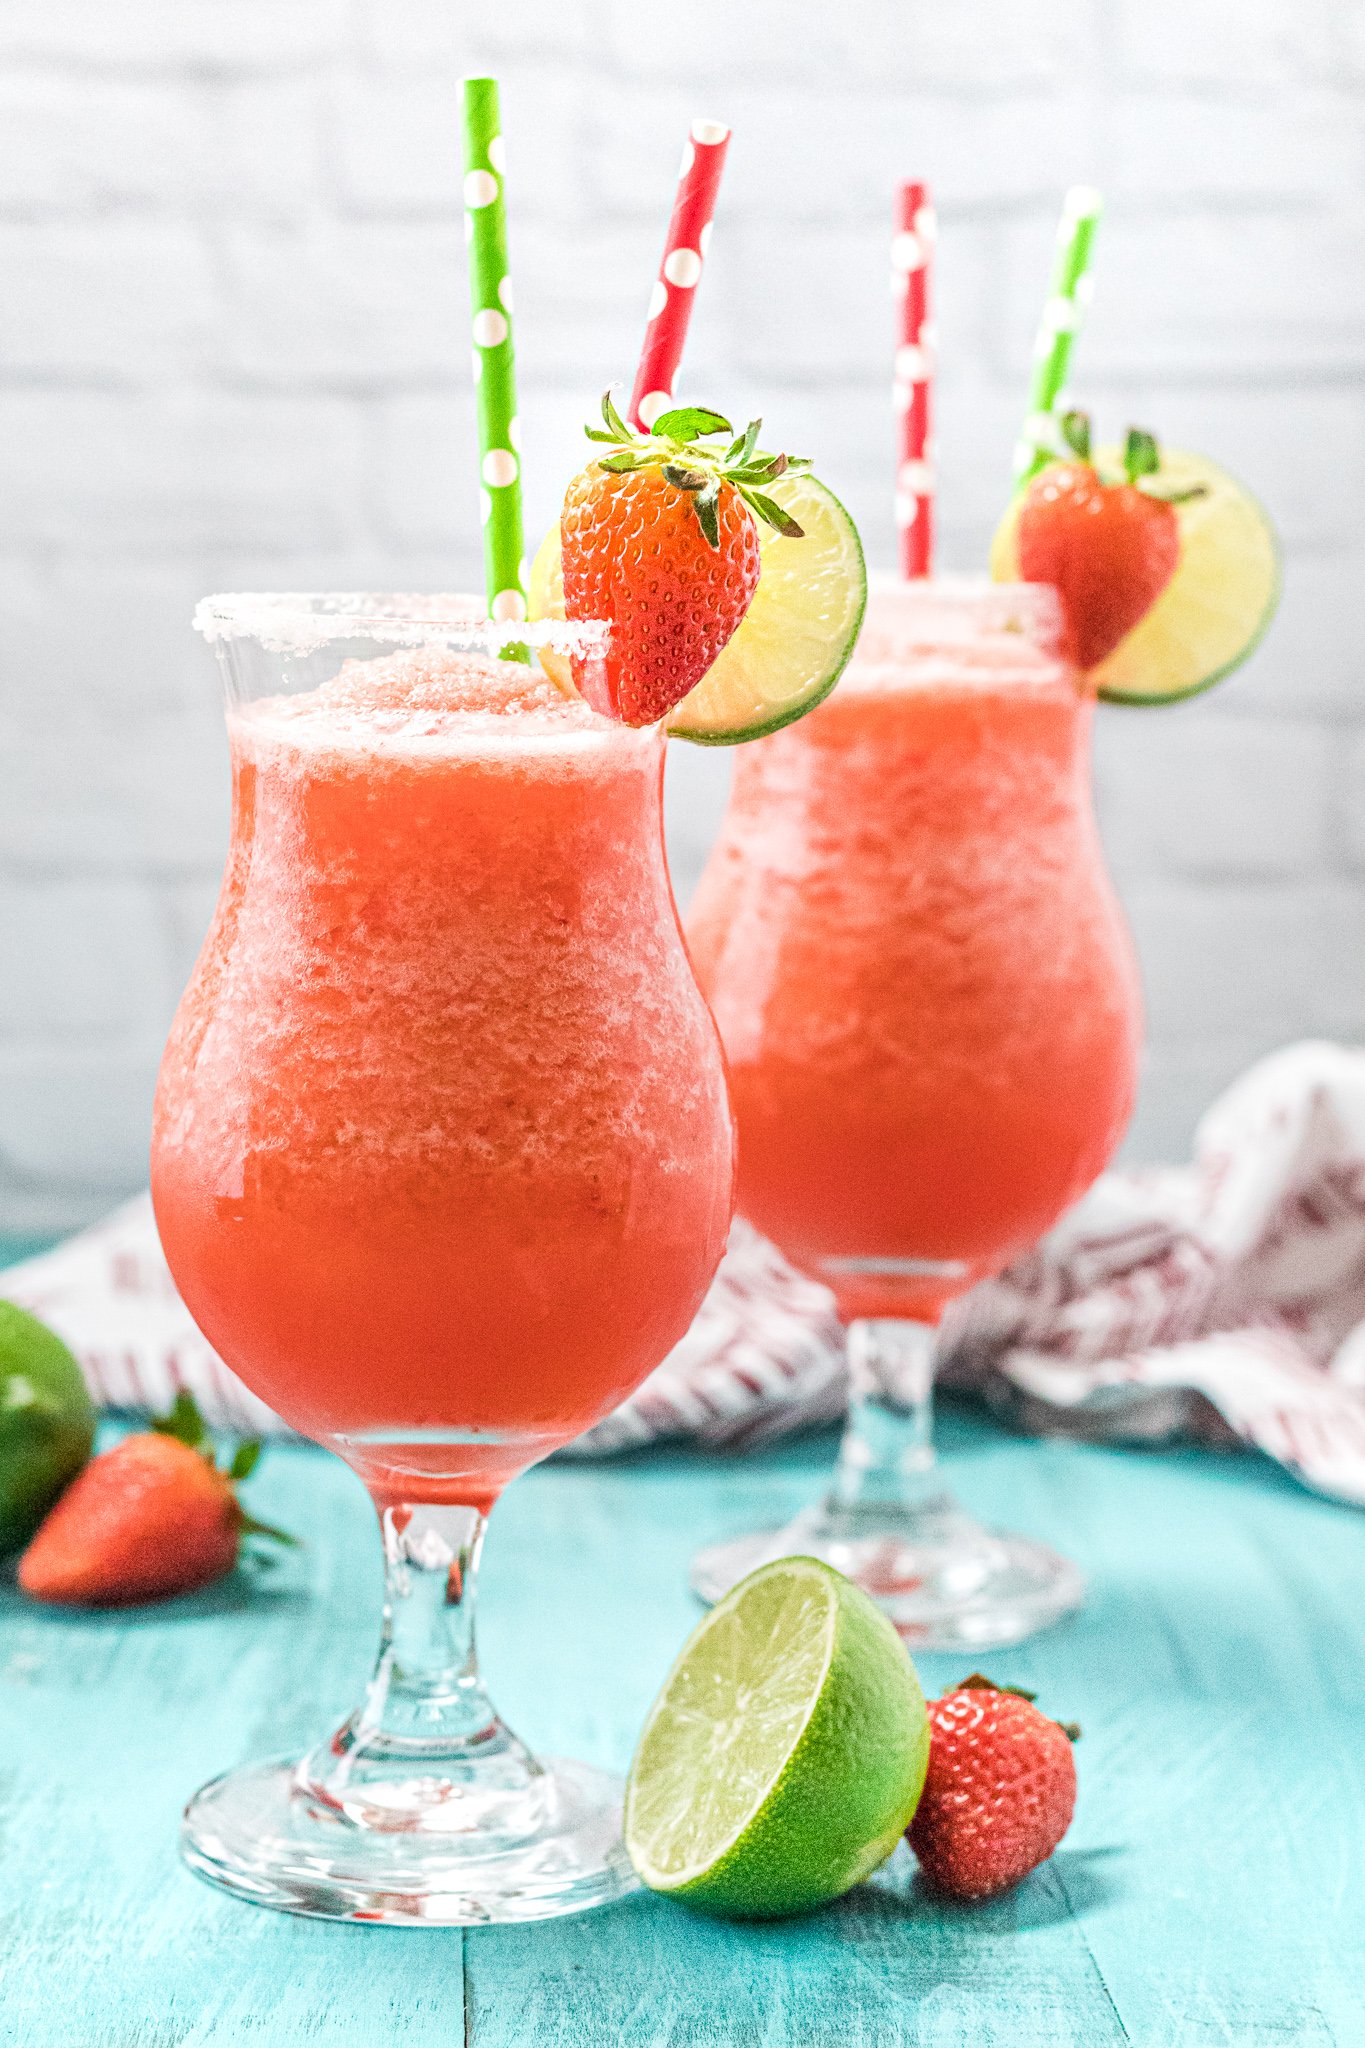 strawberry flavored alcohol drinks